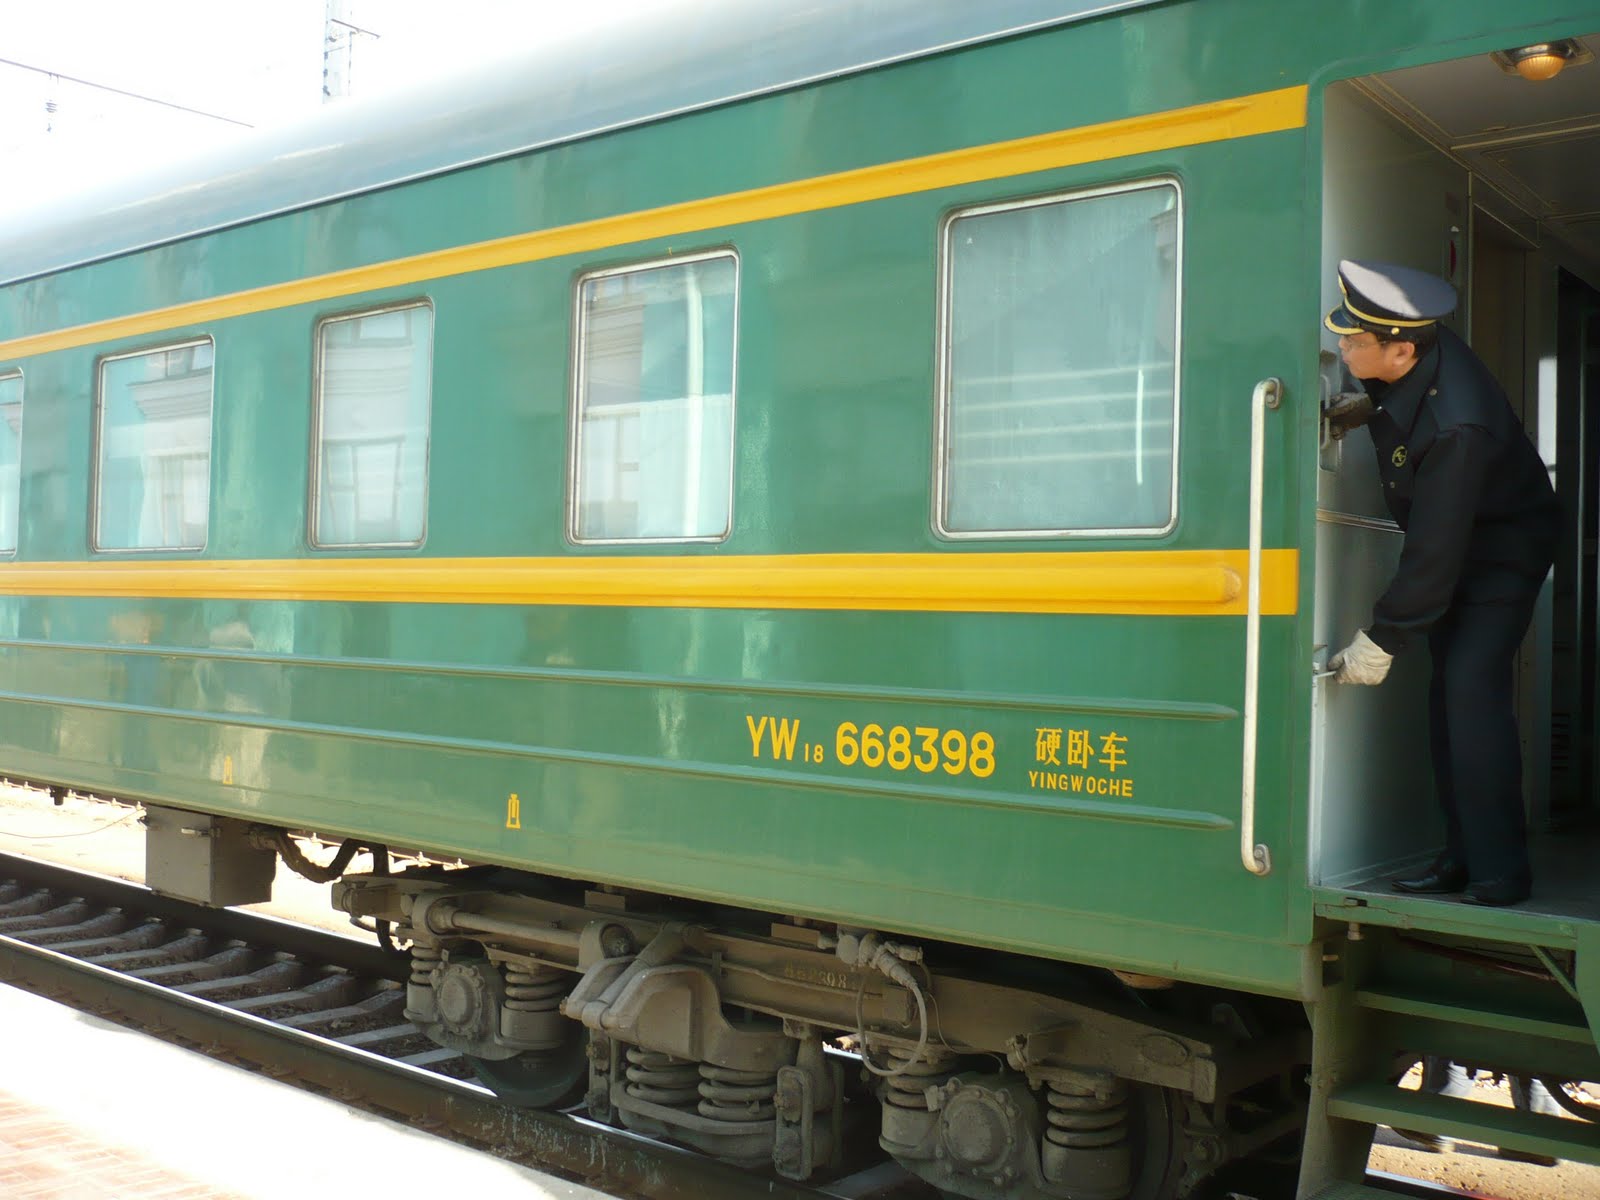 Click here for pictures of Trans Siberian Railway.